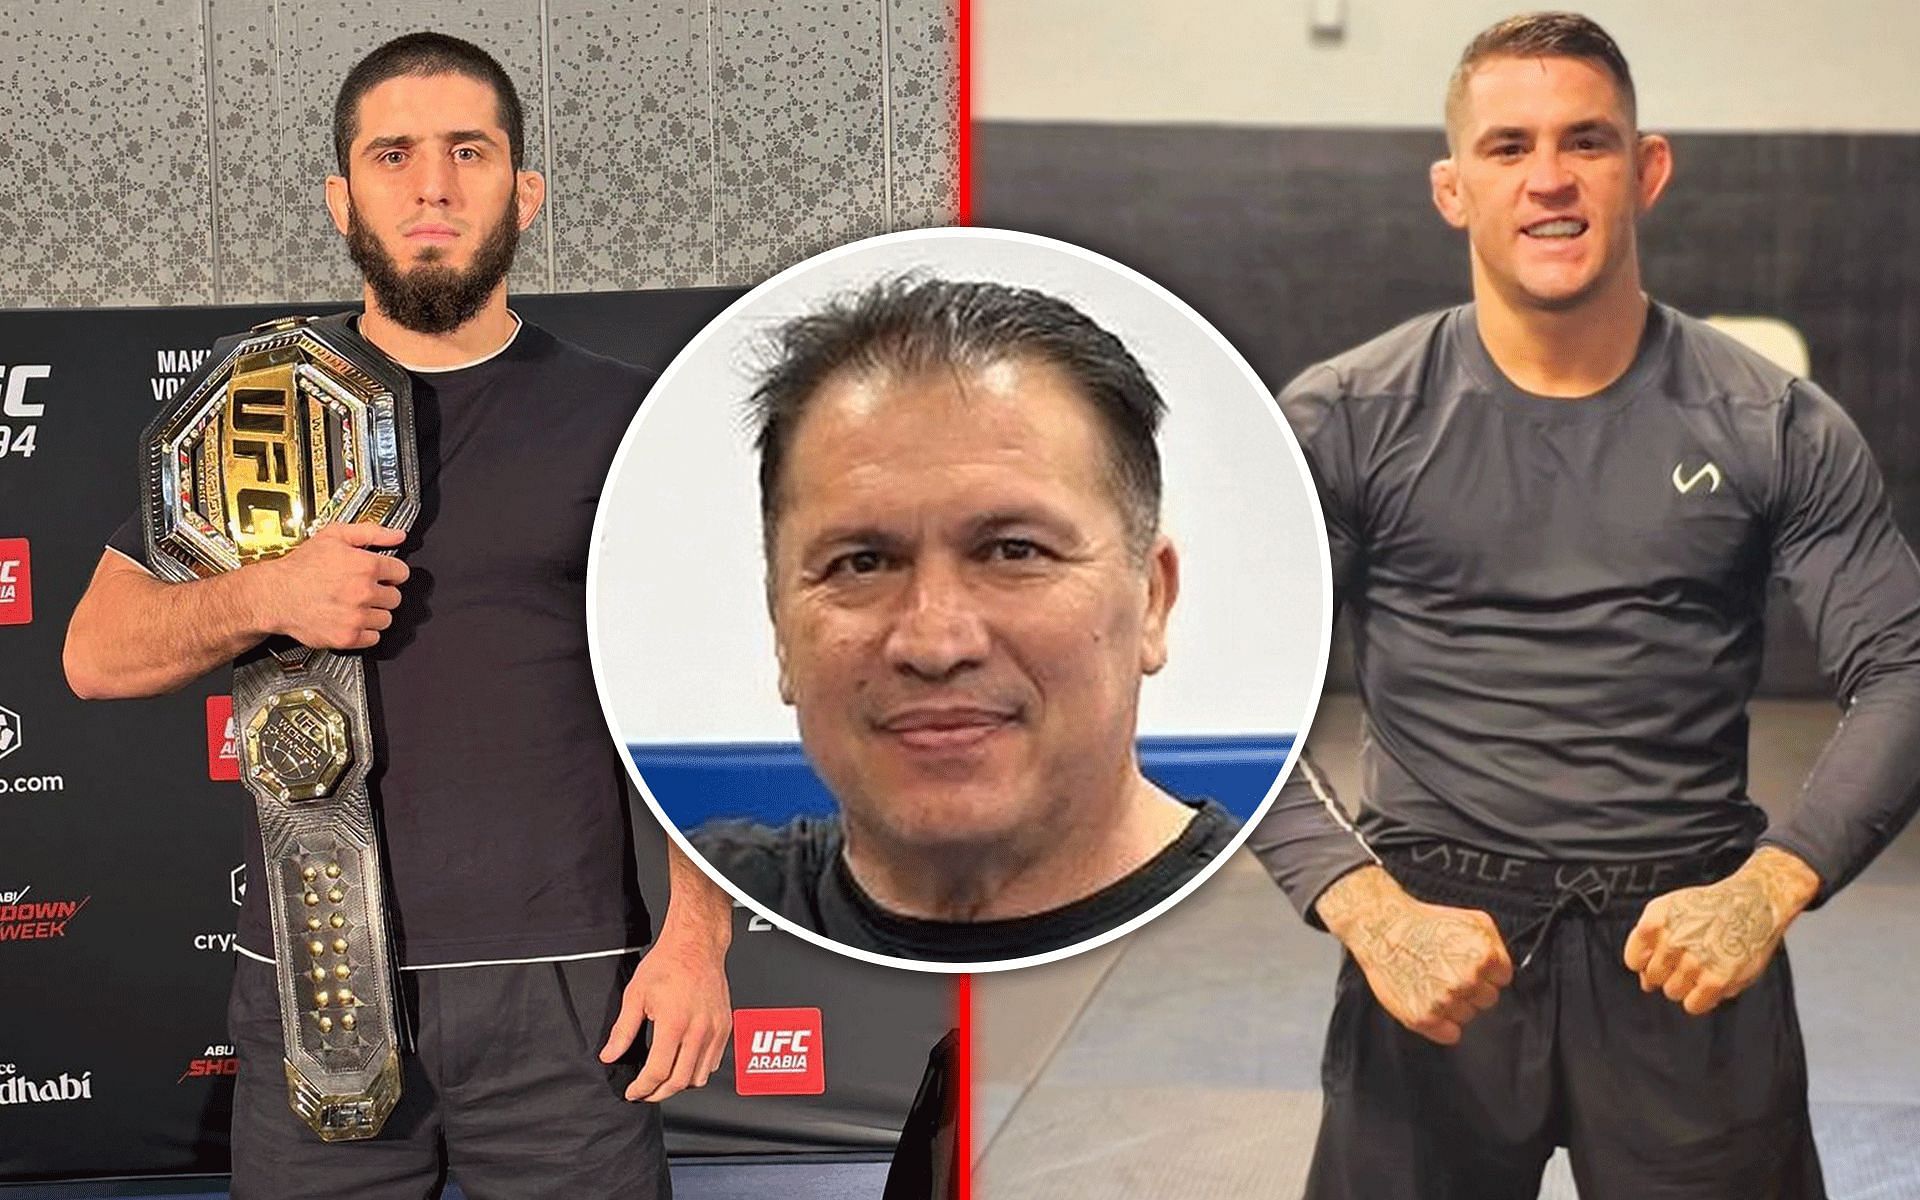 Javier Mendez weighs in on a potential Islam Makhachev vs Dustin Poirier championship fight. [Image courtesy: @islam_makhachev, @dustinpoirier and @akajav on Instagram]